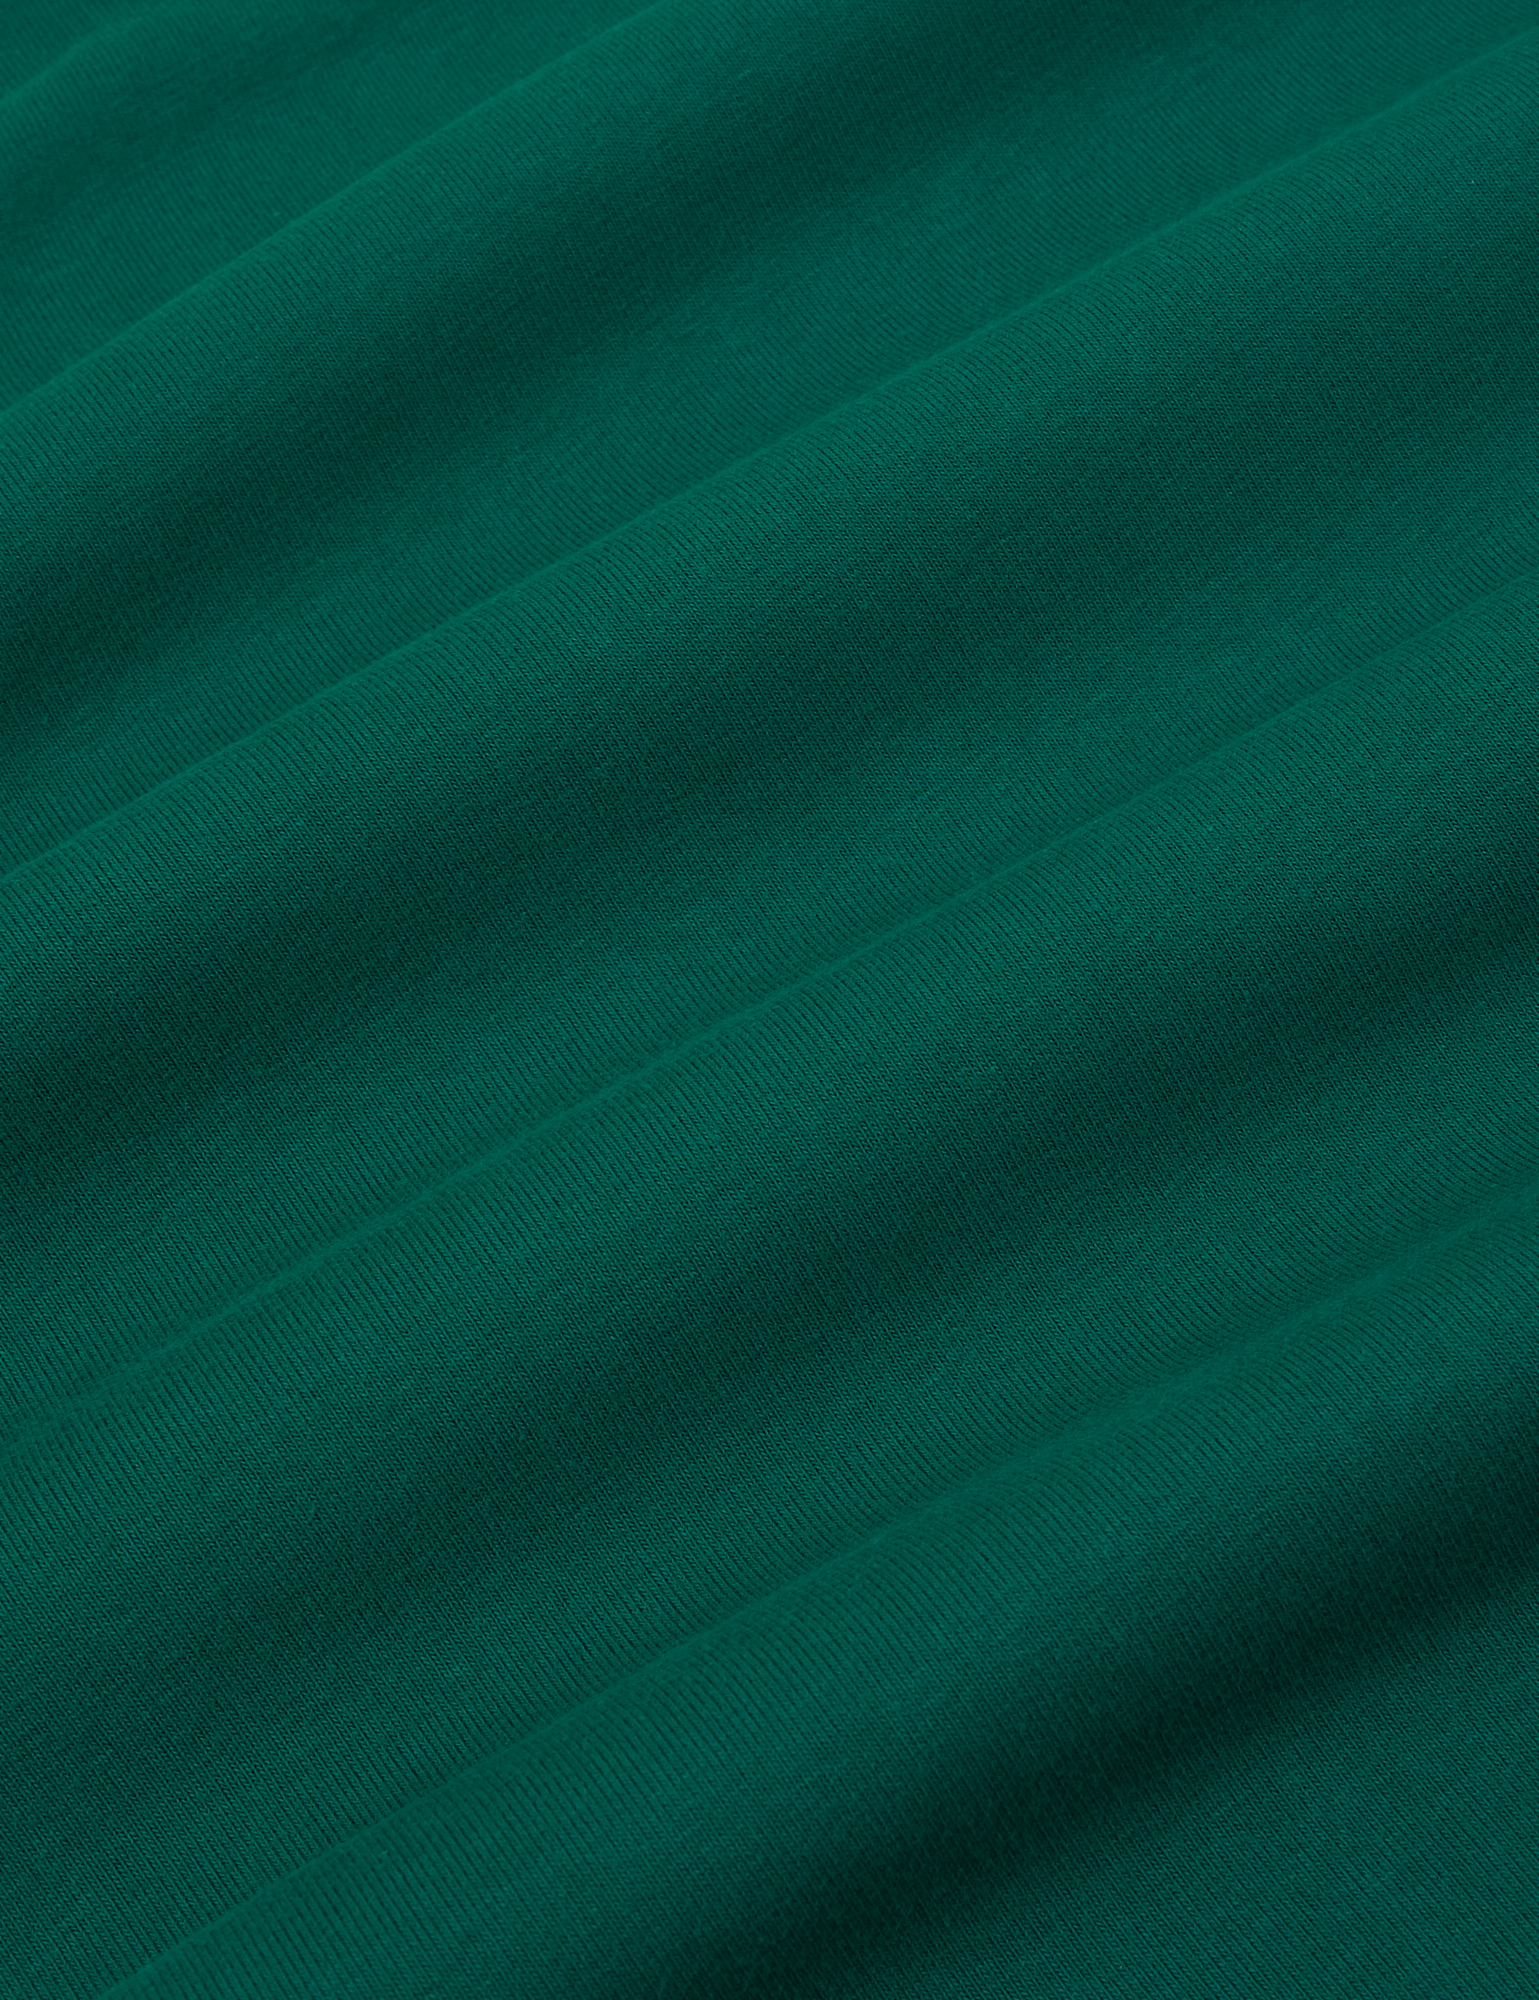 Tank Top in Hunter Green fabric detail close up